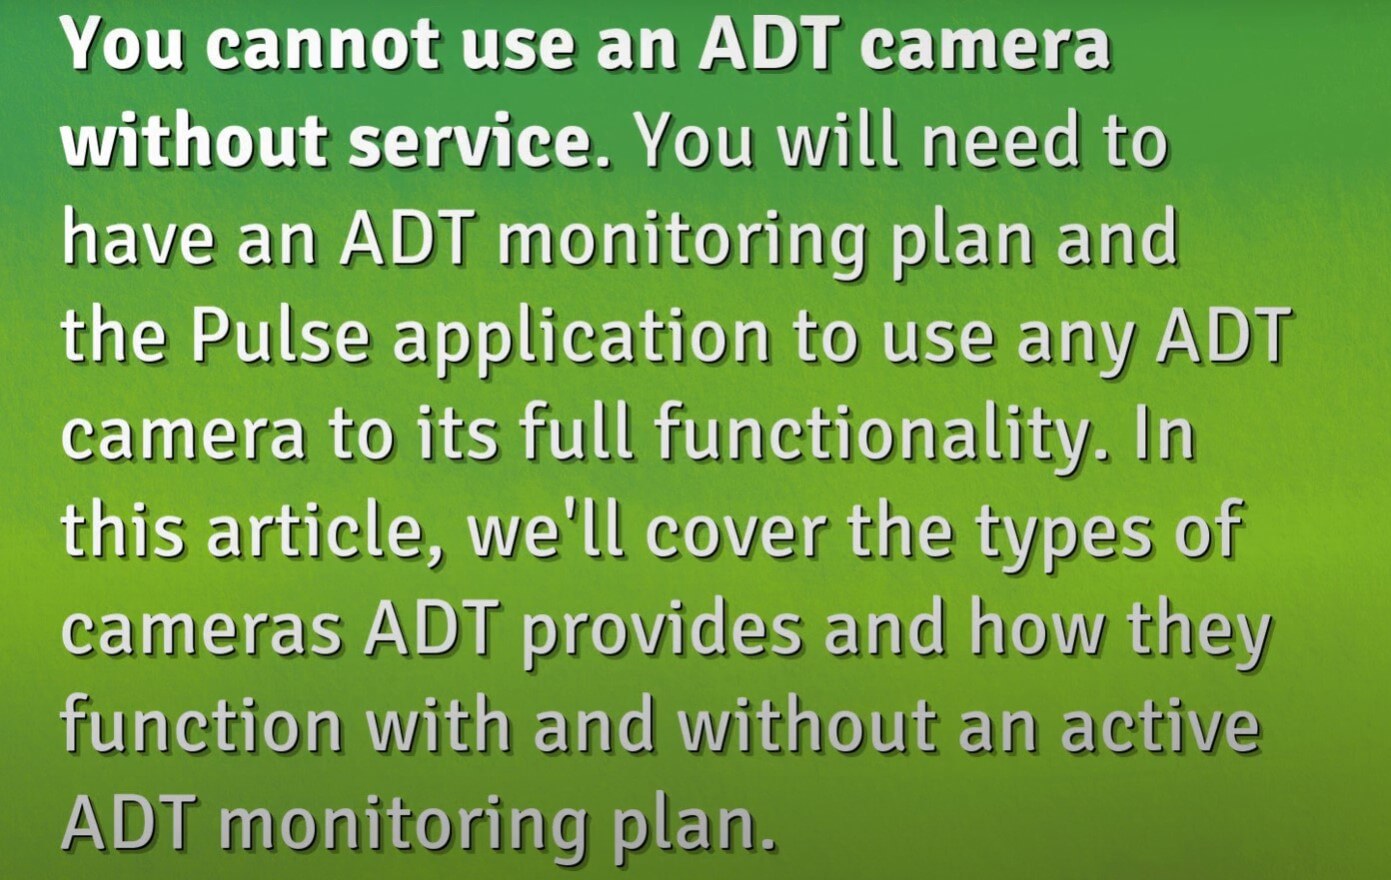 Using ADT Equipment Without Service